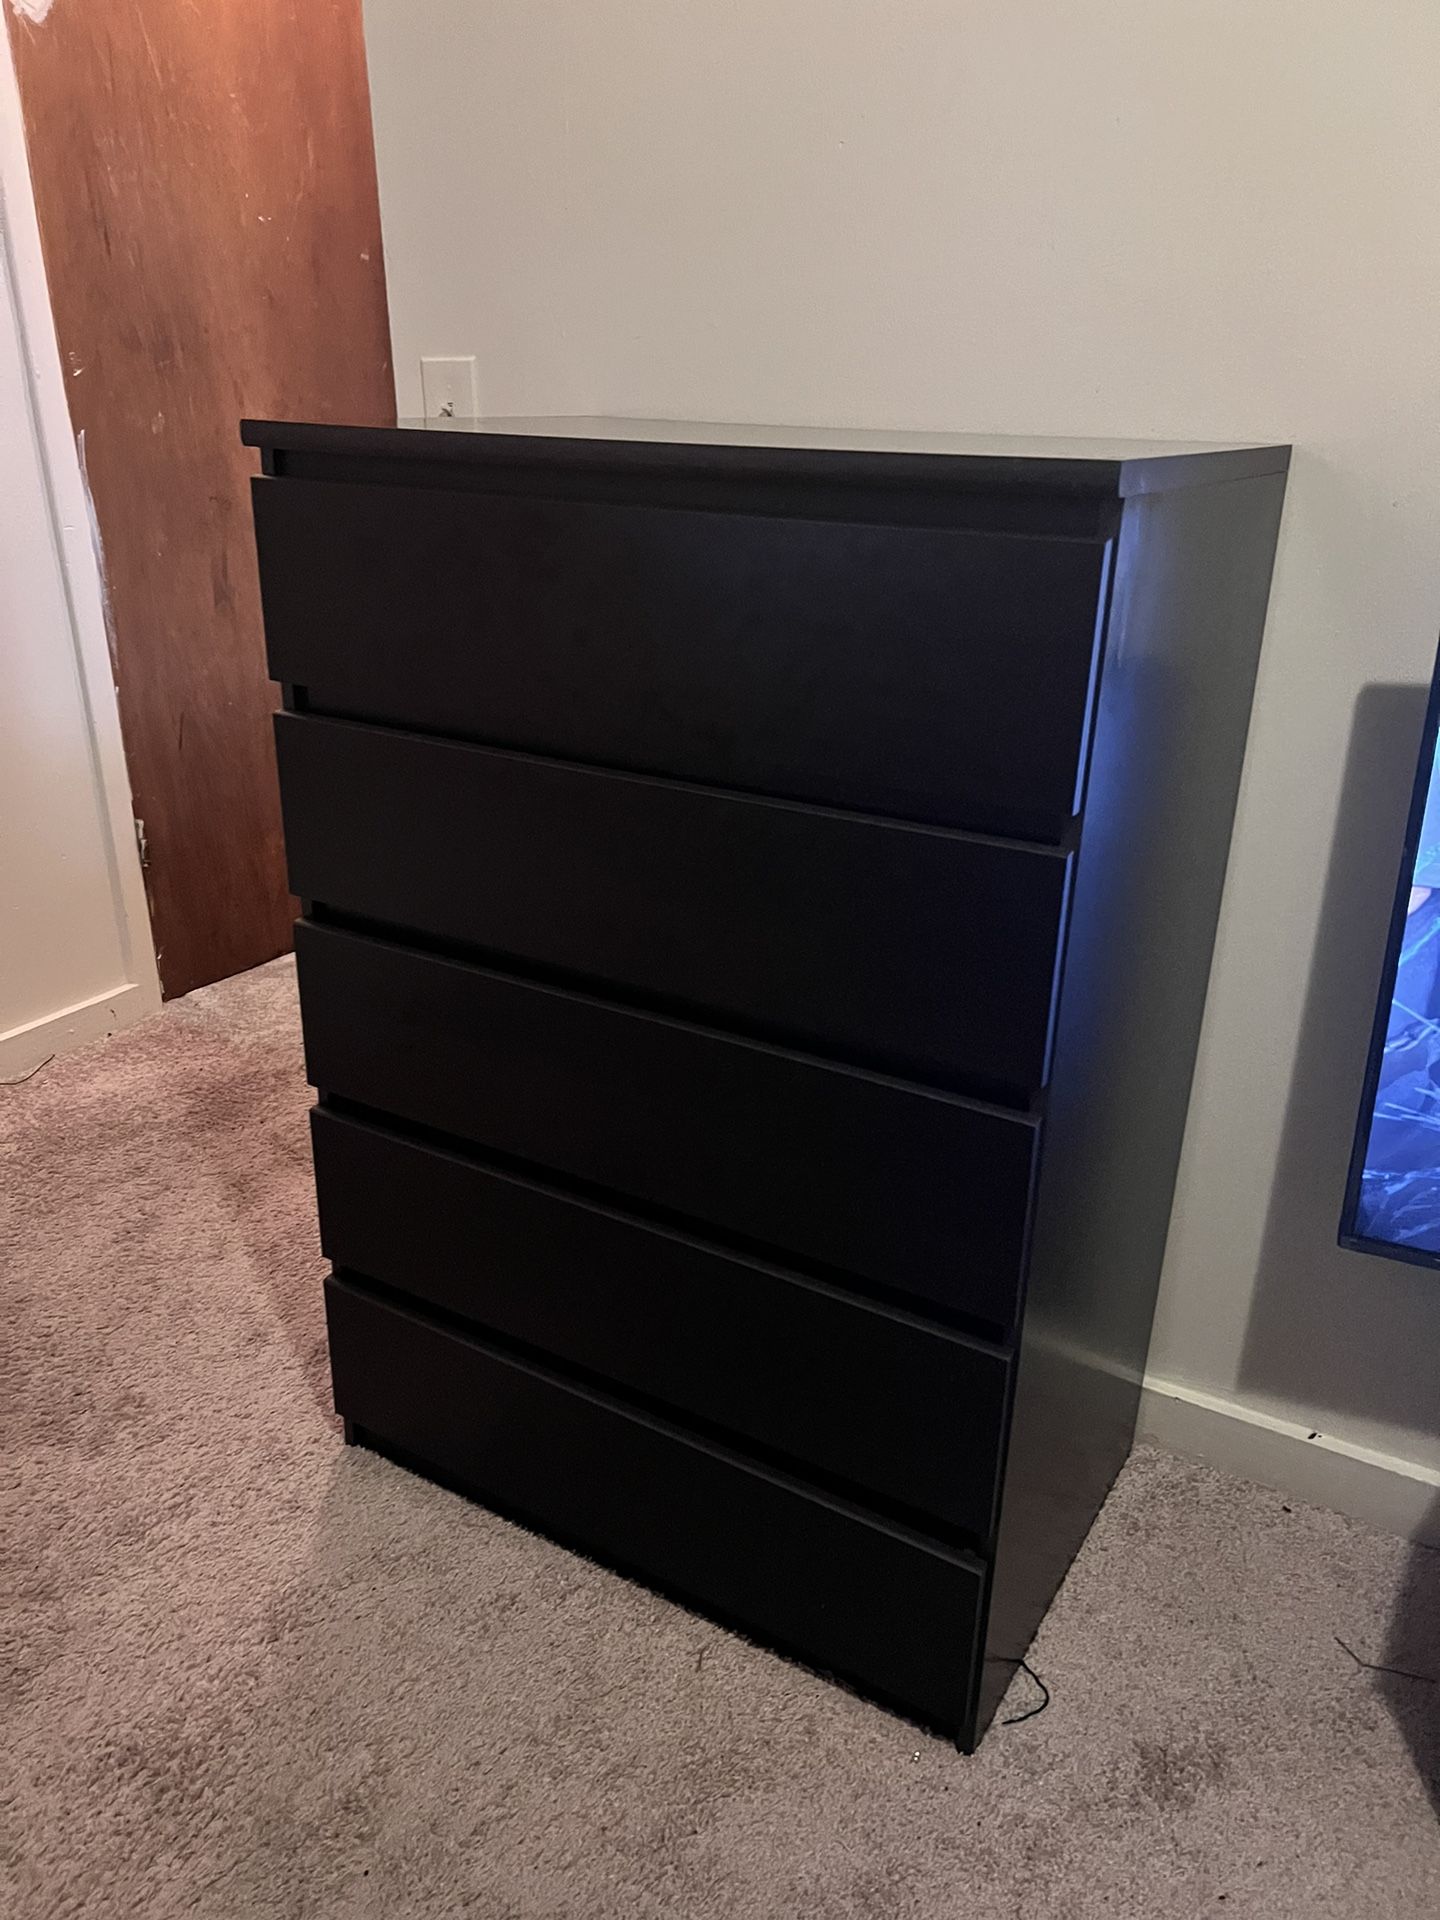 BLACK 5-DRAWER CHEST OF DRAWERS. $60